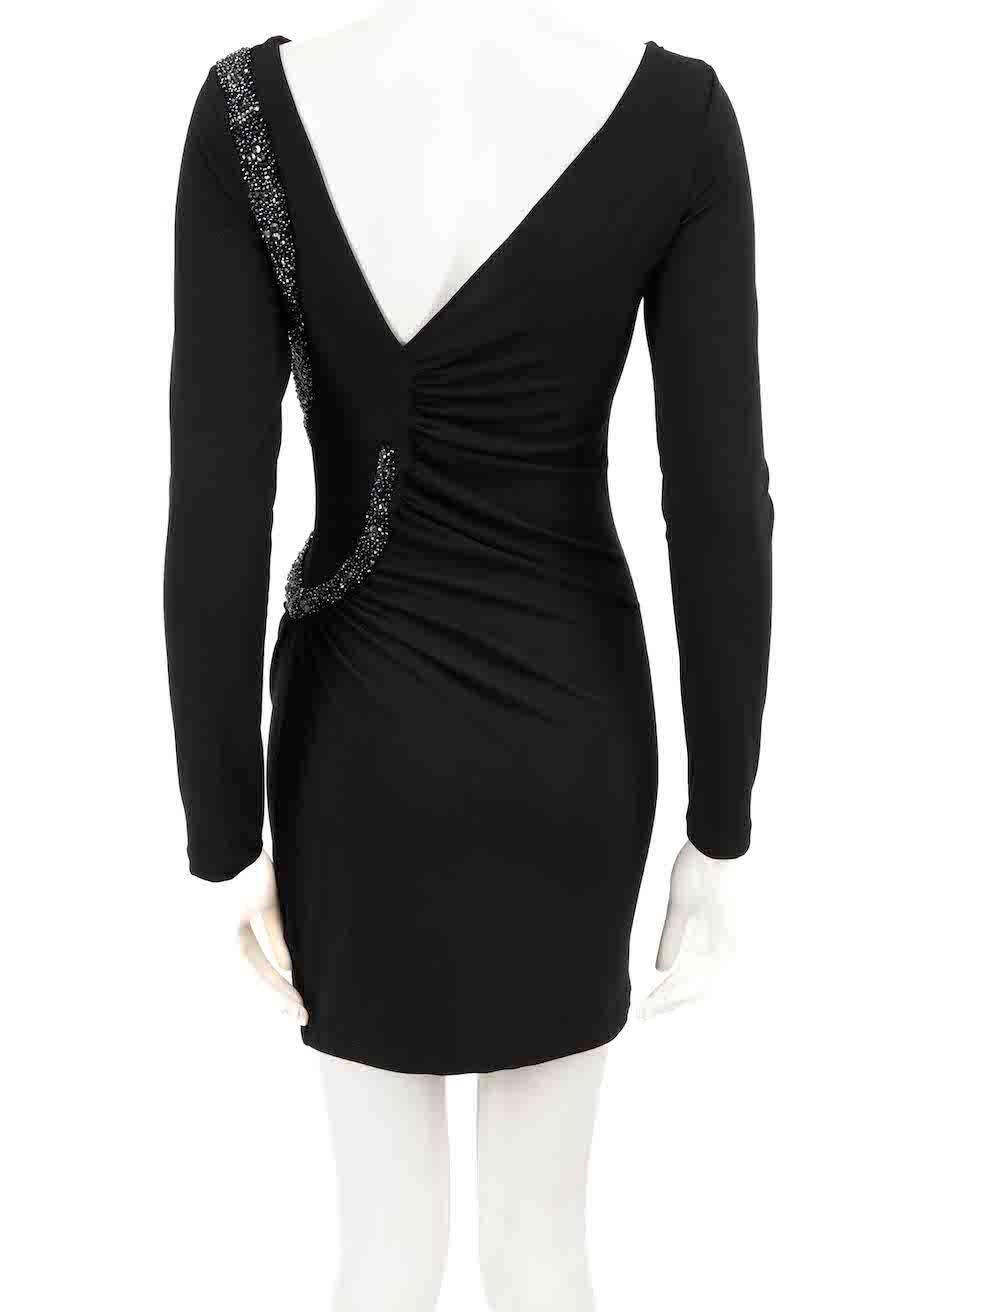 Philipp Plein Black Snake Embellished Mini Dress Size M In Good Condition For Sale In London, GB